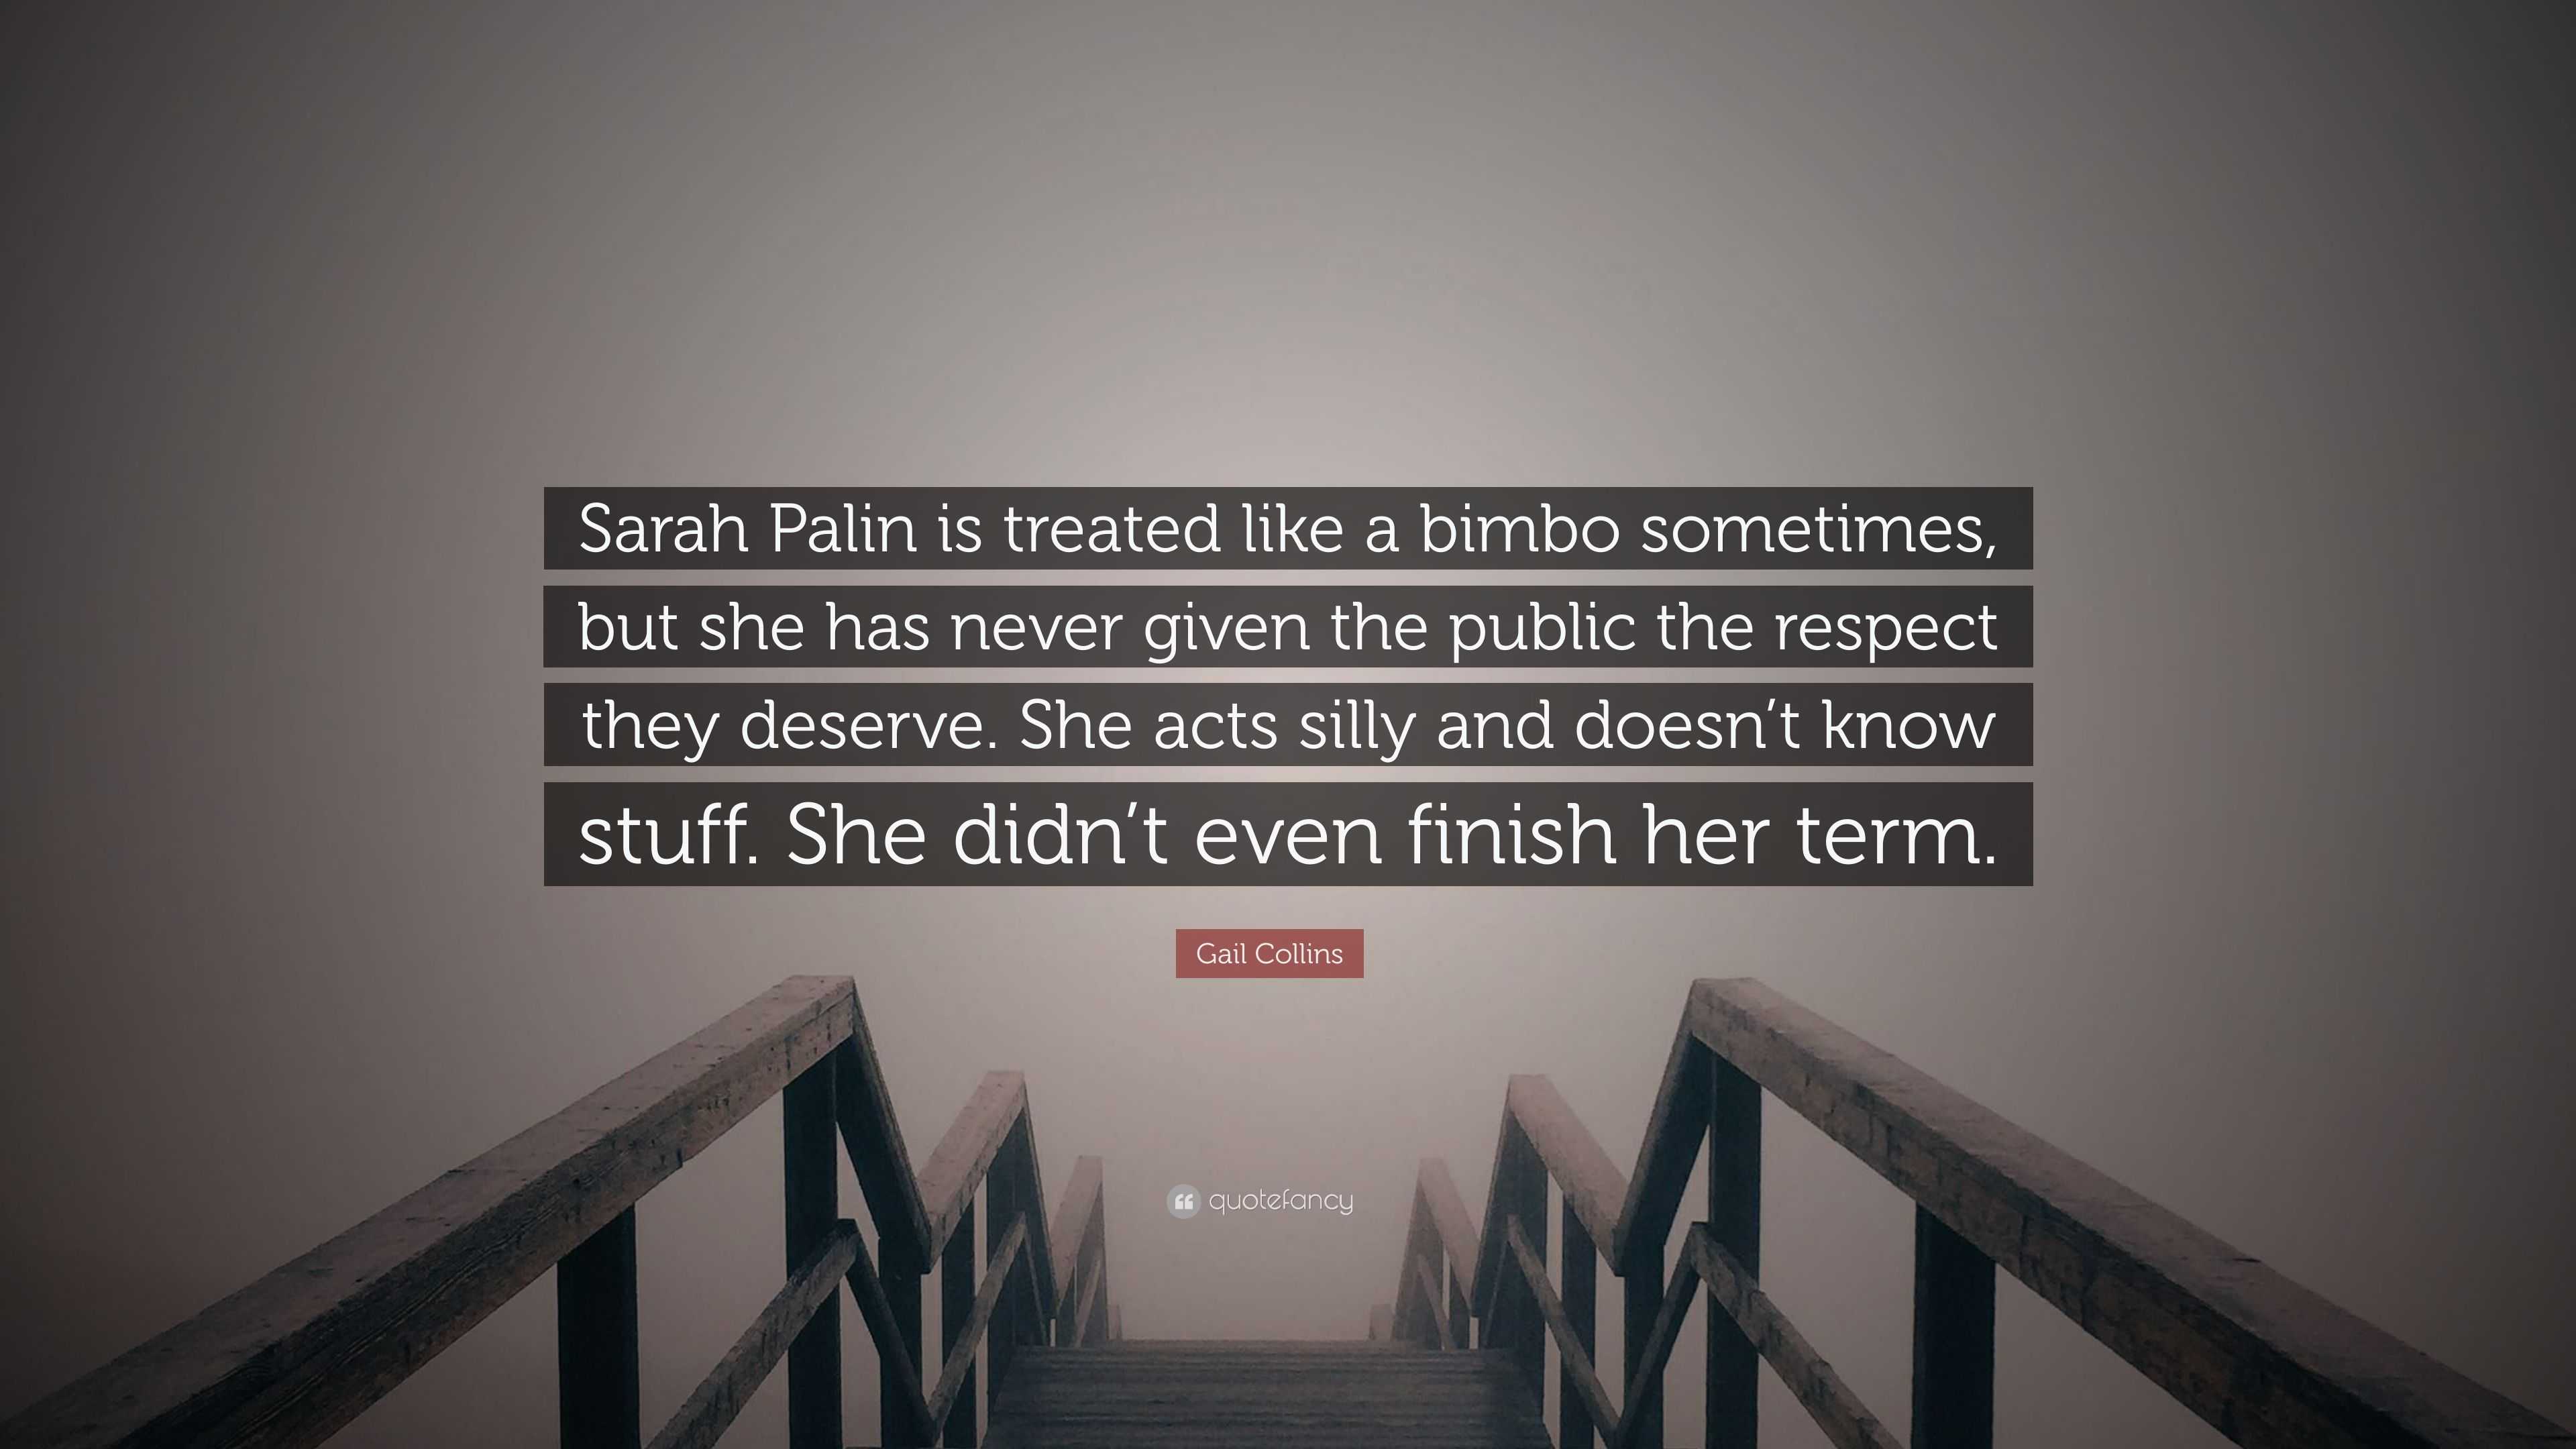 Gail Collins Quote “sarah Palin Is Treated Like A Bimbo Sometimes But She Has Never Given The